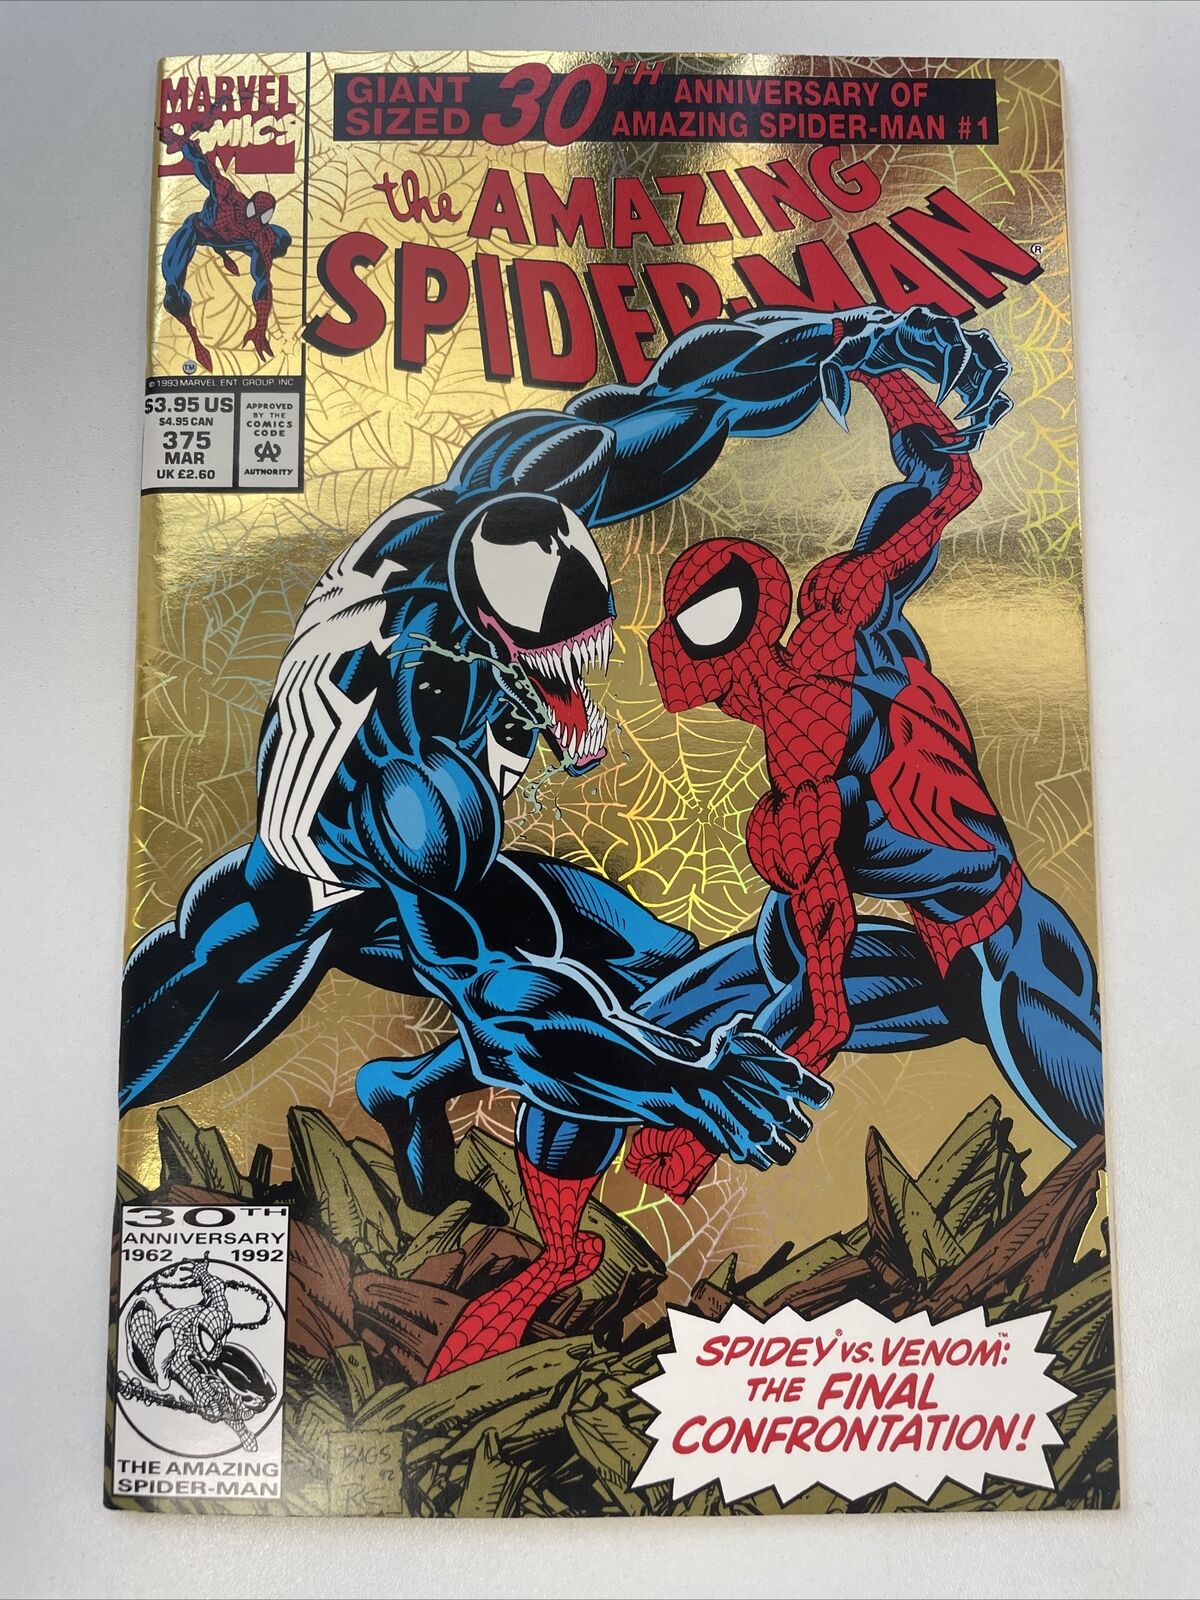 The Amazing SpiderMan GIANT SIZED 30th ANNIVERSARY ISSUE THE FINAL CONFRONTATION